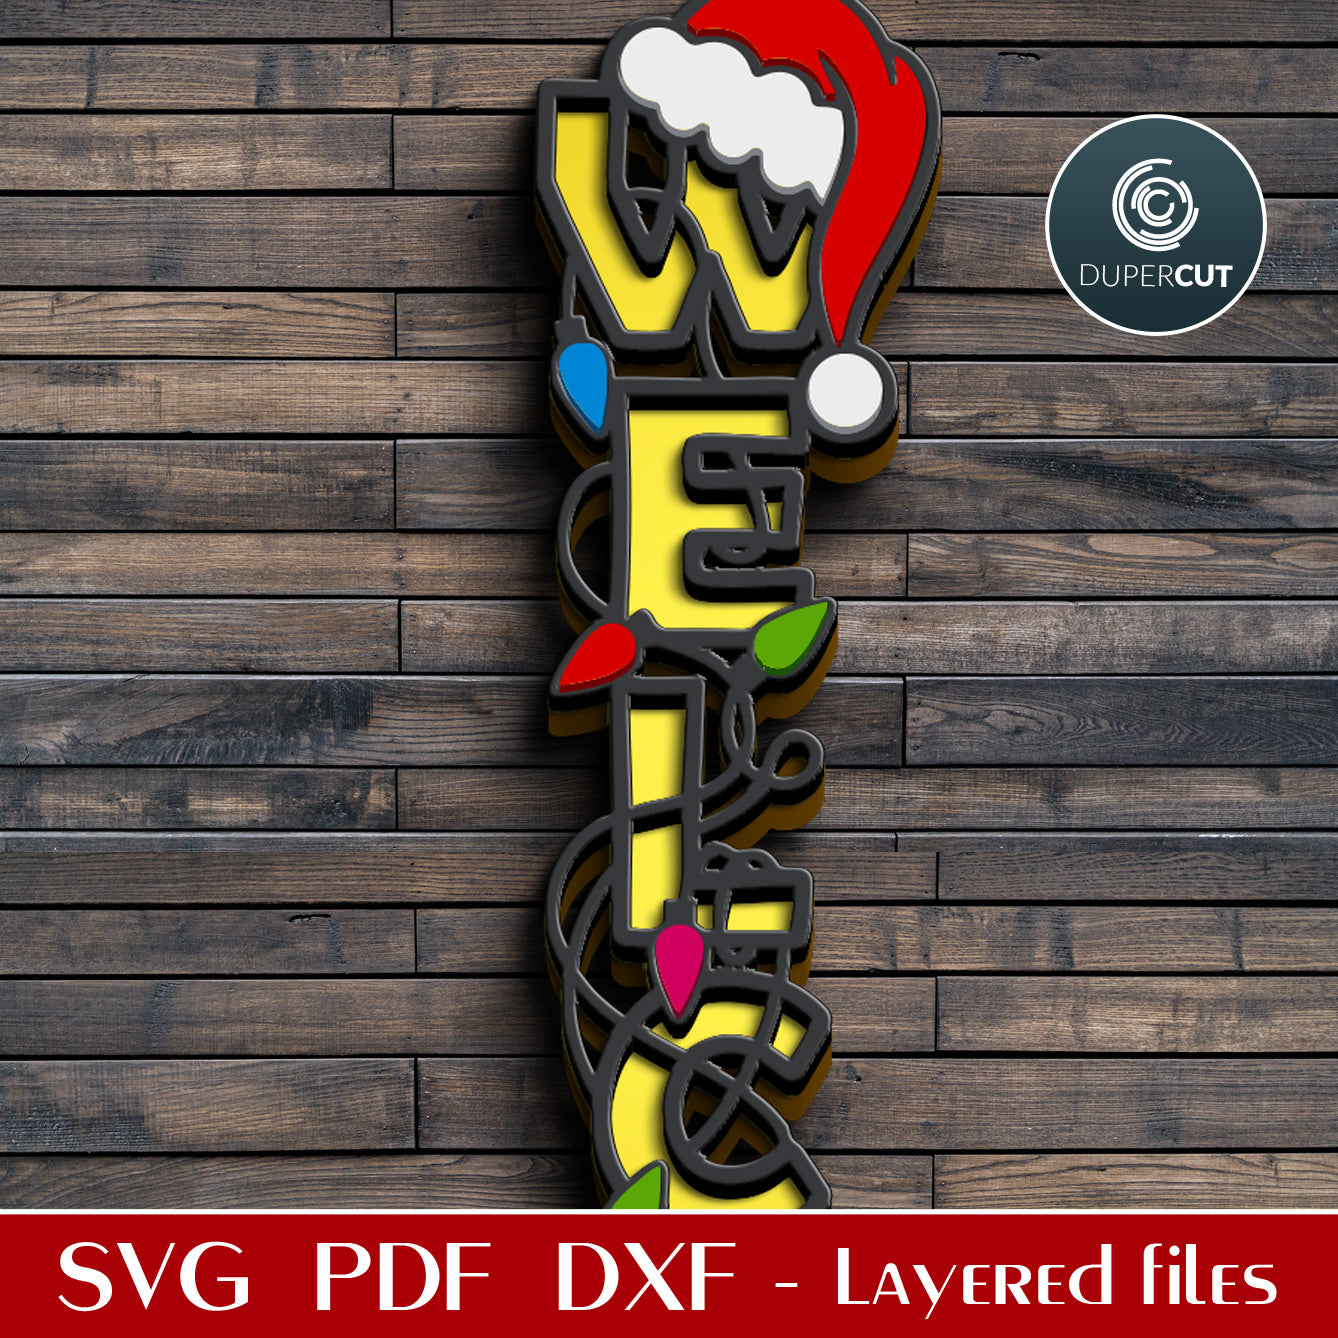 Welcome sign with holiday lights Christmas decoration - SVG DXF laser cutting files for Glowforge, Cricut, CNC plasma machines by www.DuperCut.com